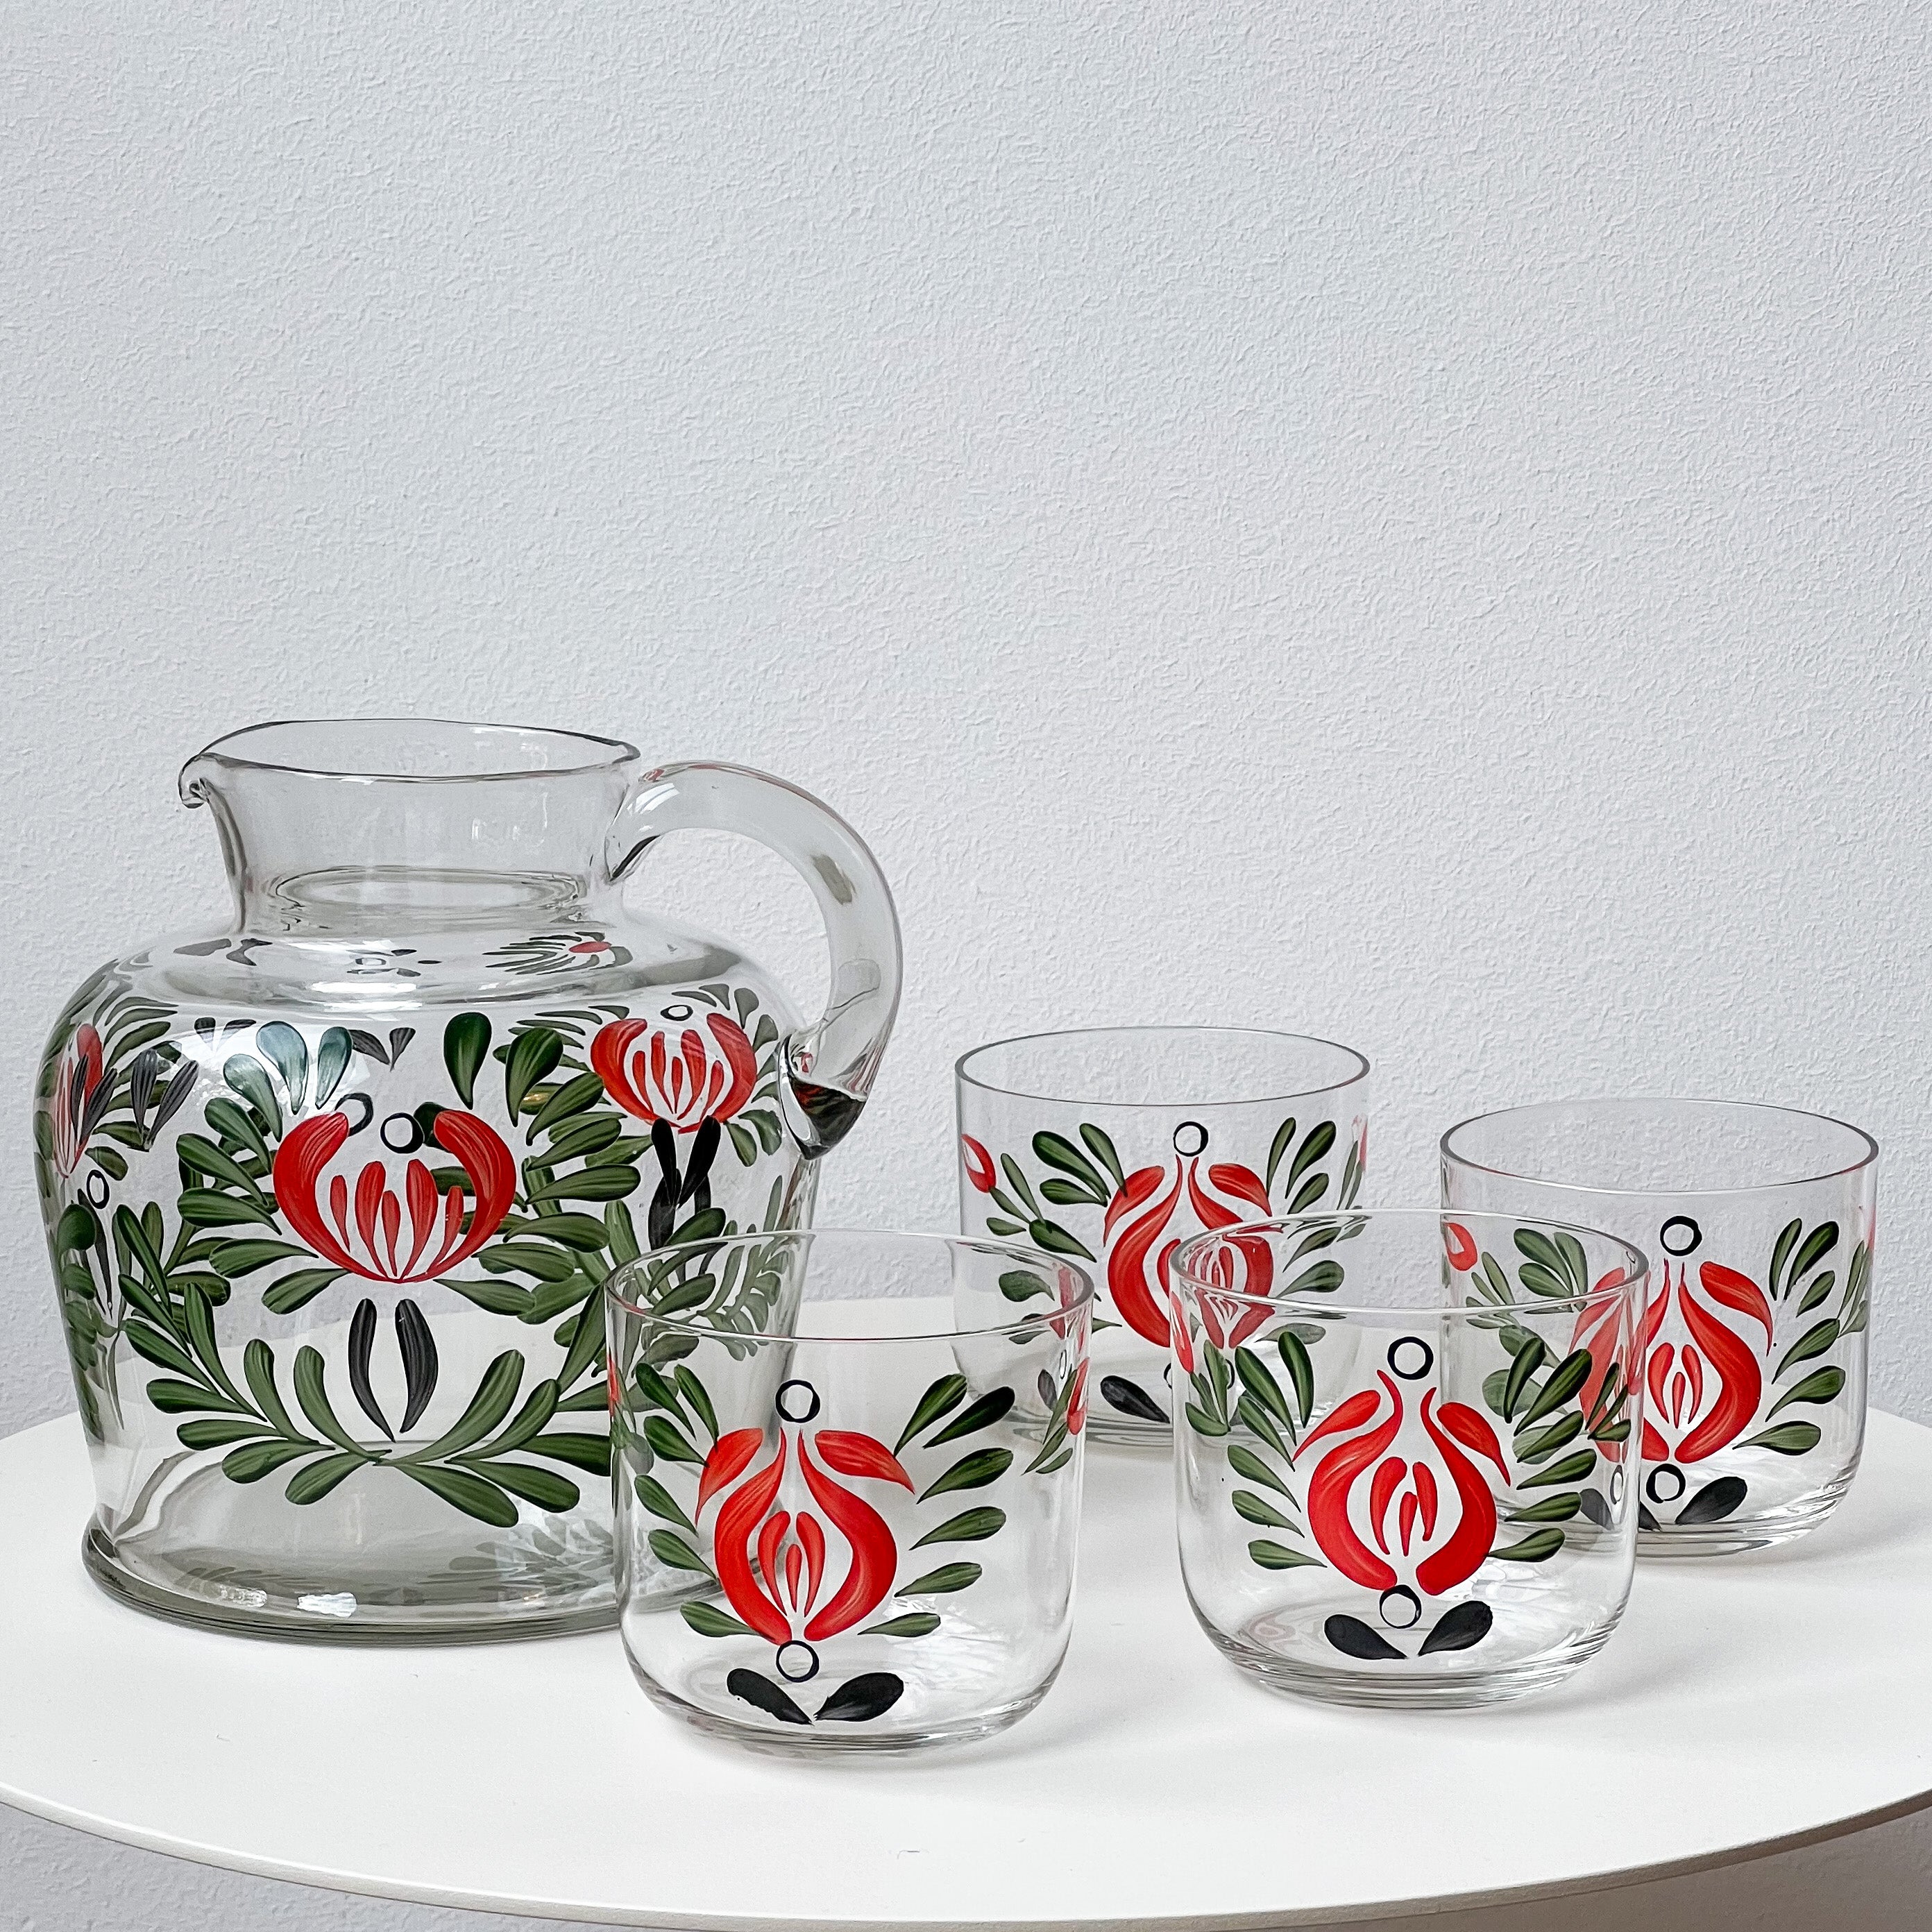 Hand-painted carafe and glasses